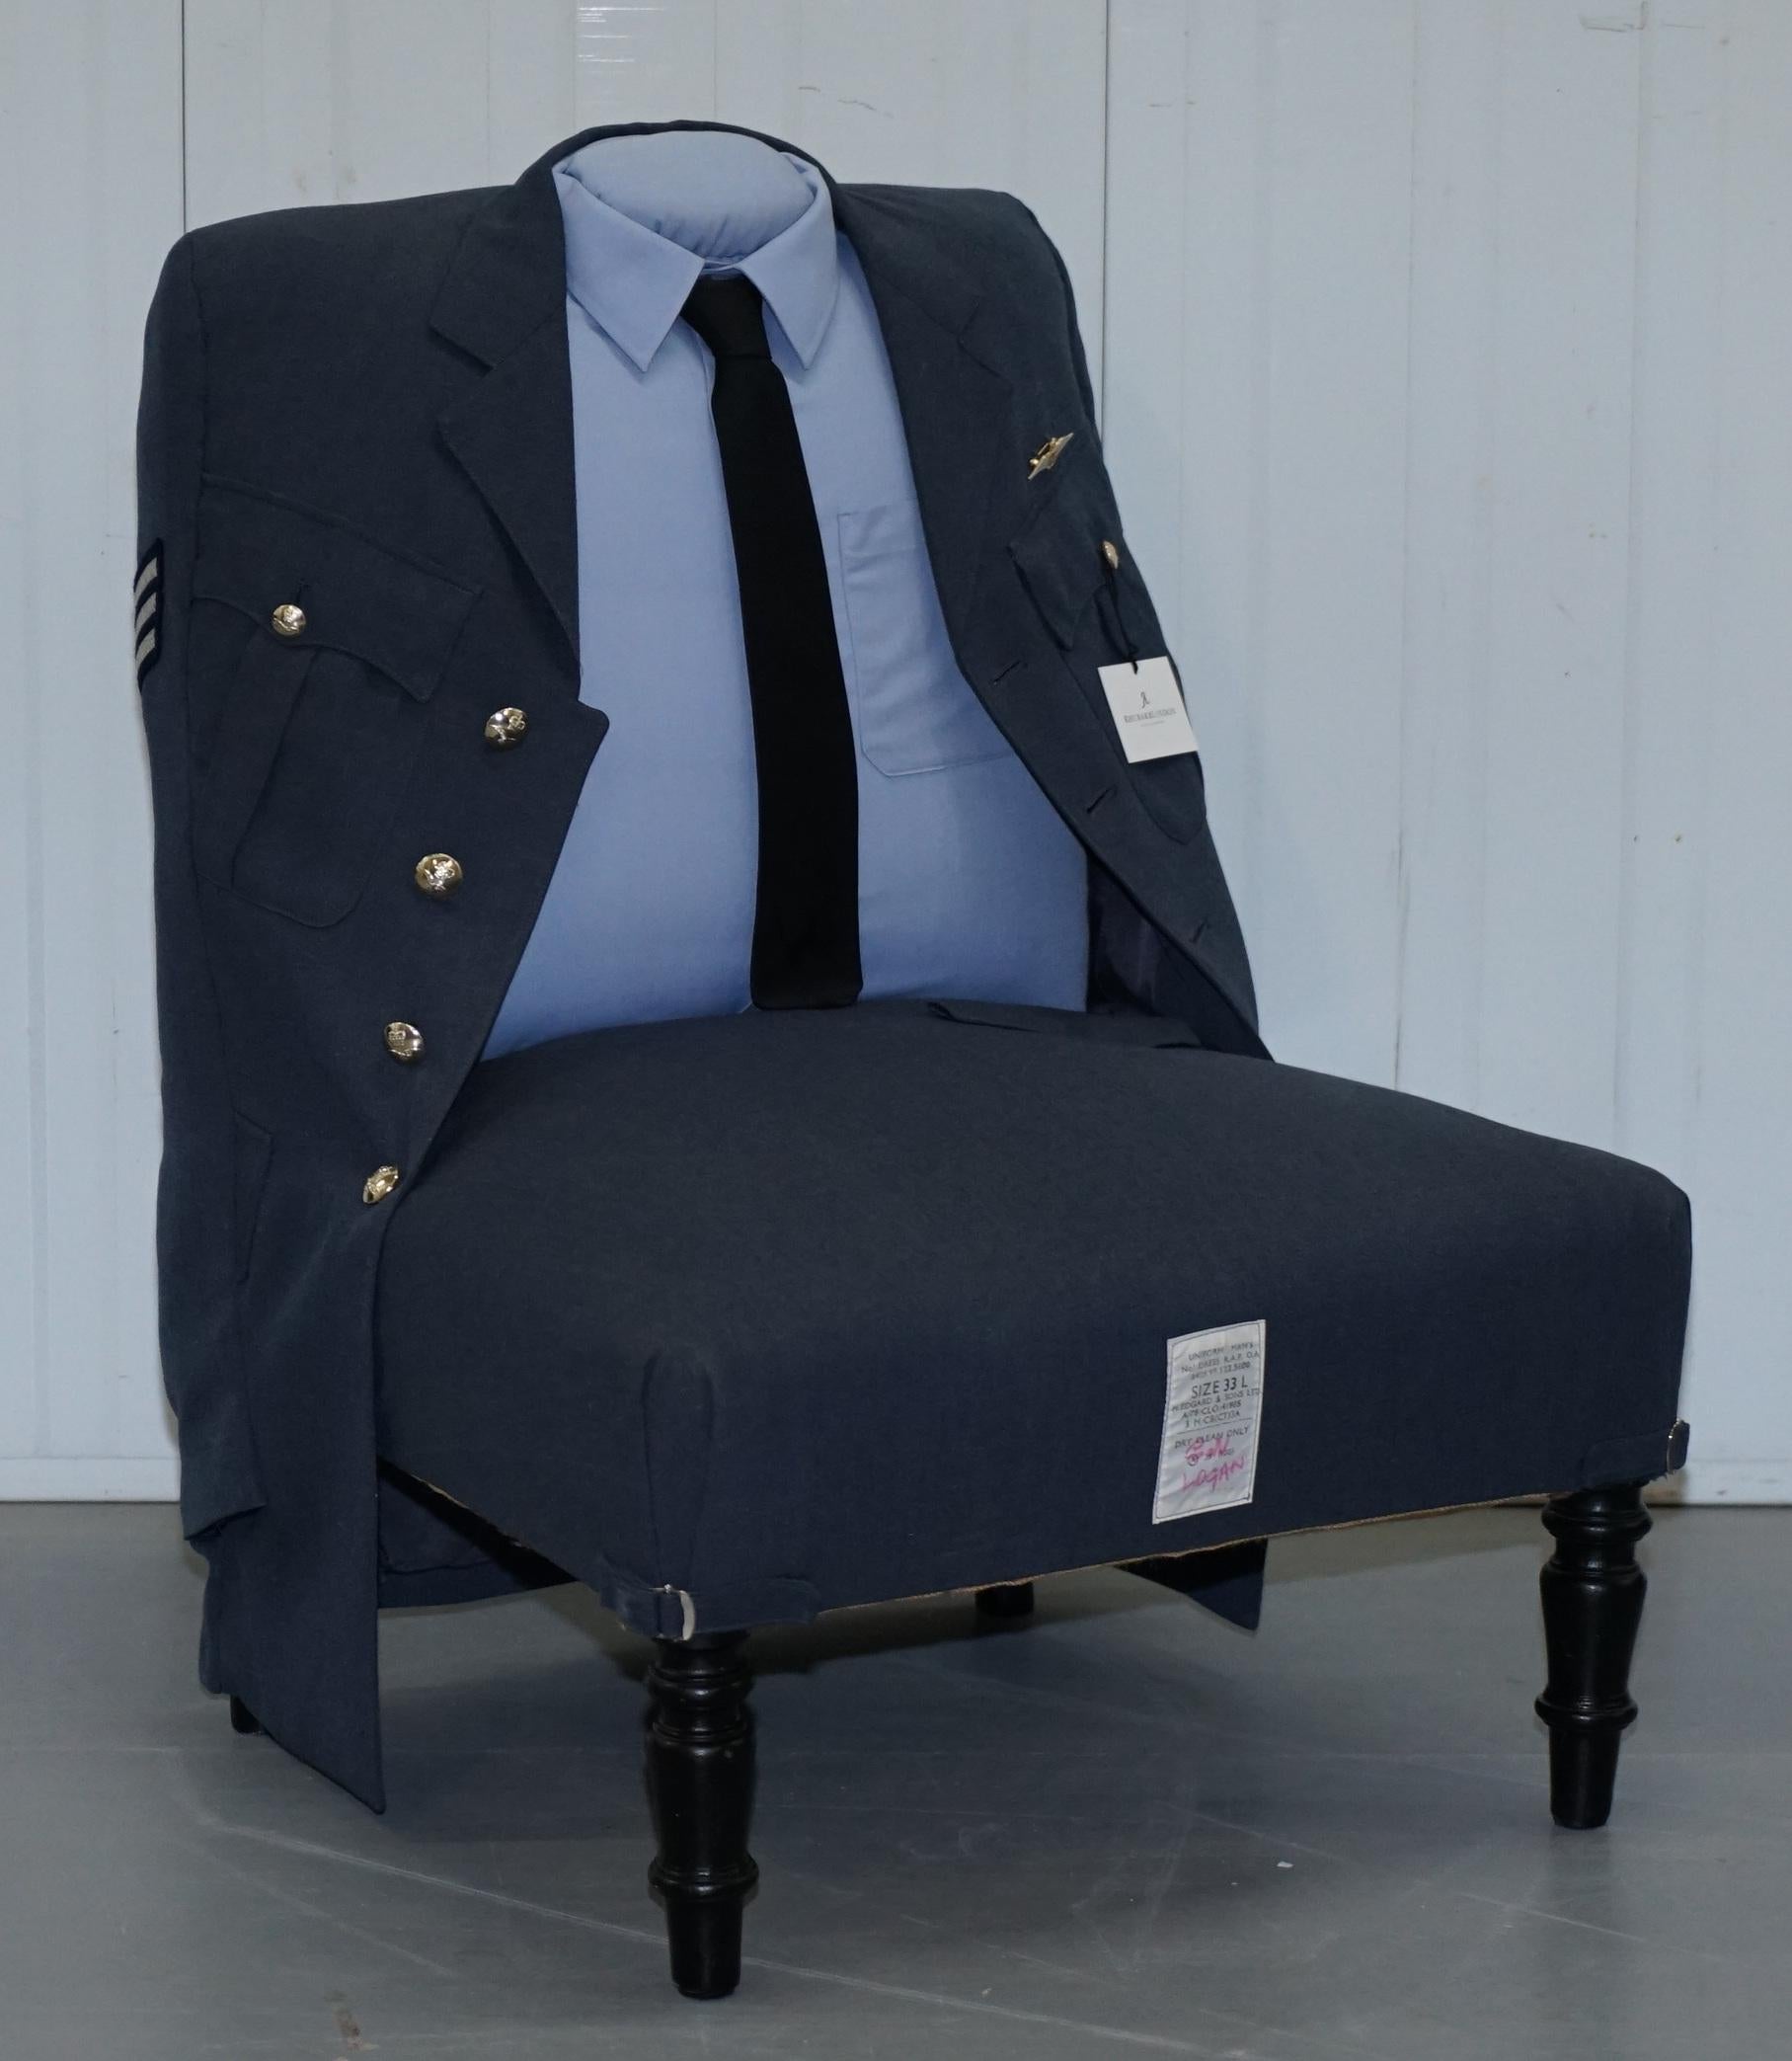 We are delighted to offer for sale this brand new Royal Air Force uniform armchair from Treniq.



And specification: The Royal Air Force uniform armchair is a delightful little late Victorian, mahogany hall chair with turned blackened enamel